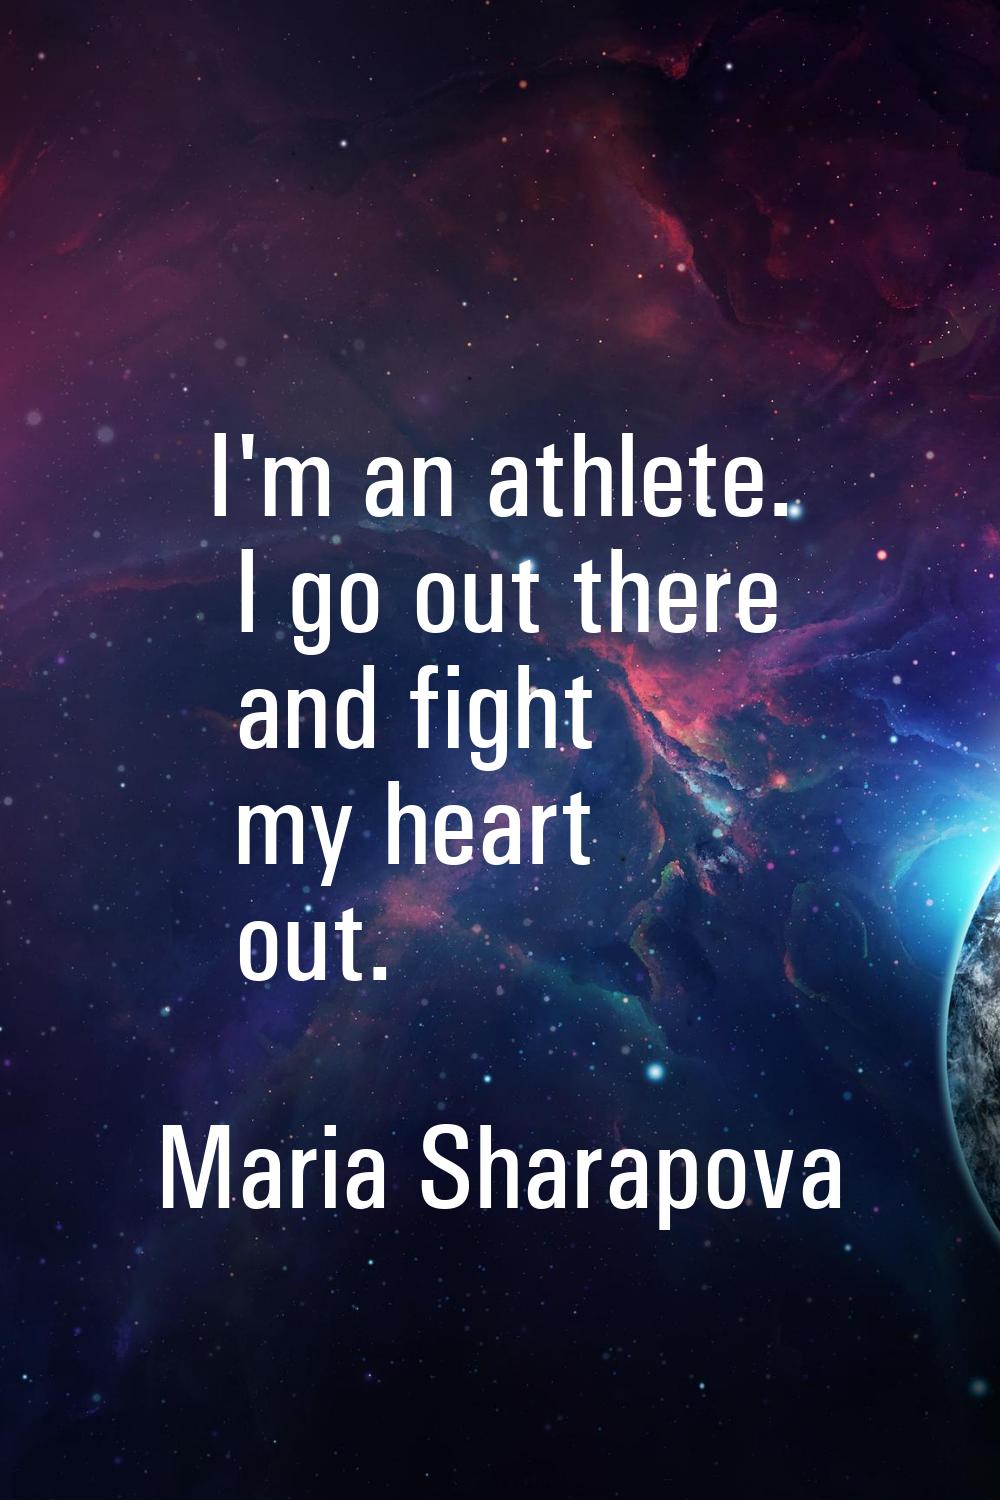 I'm an athlete. I go out there and fight my heart out.